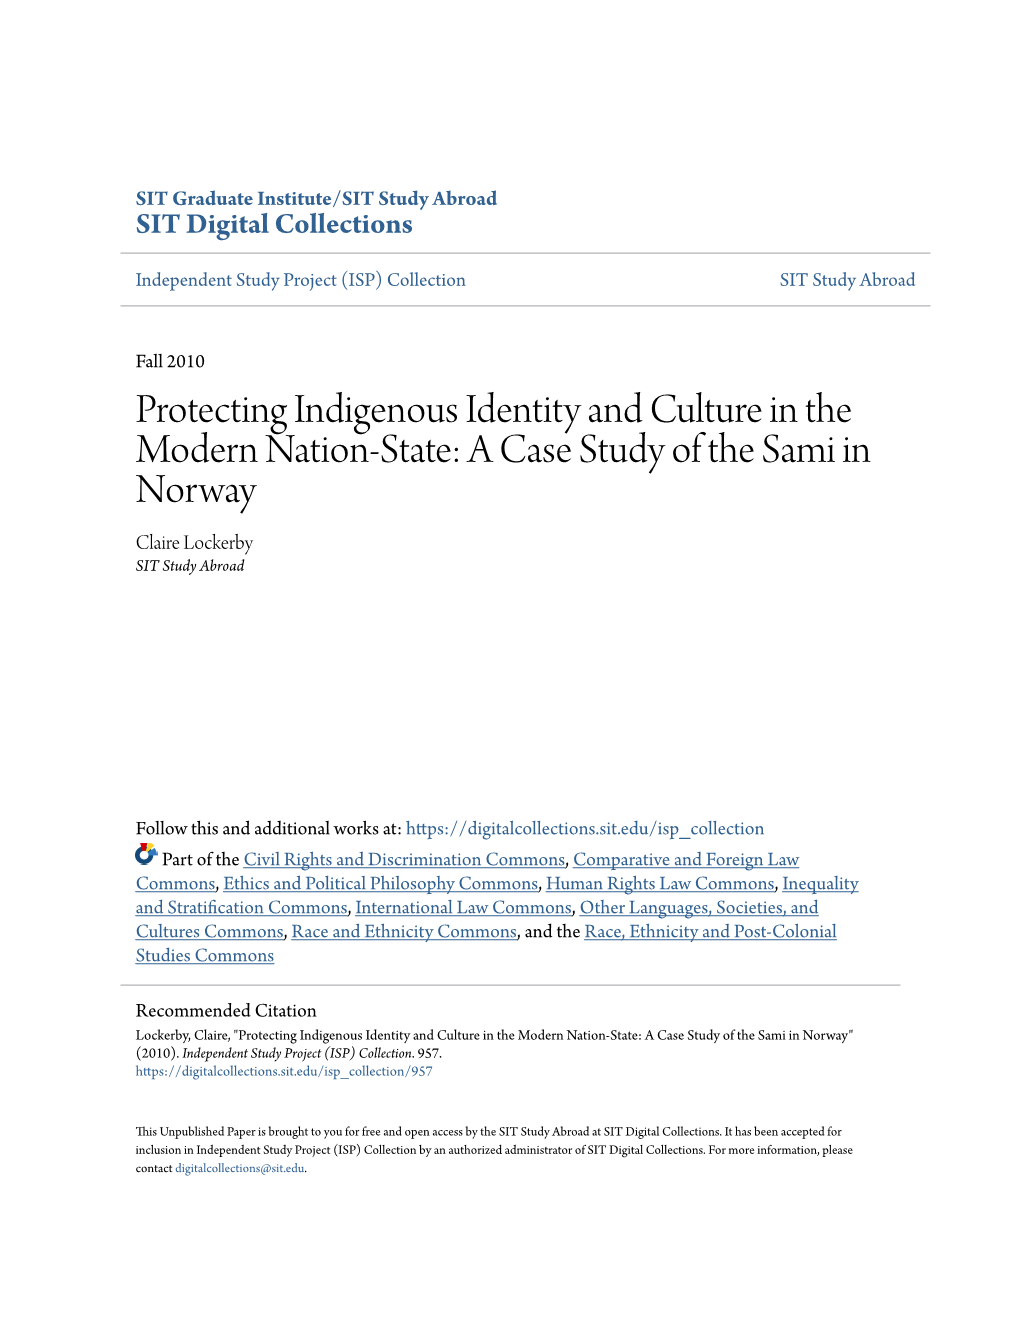 A Case Study of the Sami in Norway Claire Lockerby SIT Study Abroad